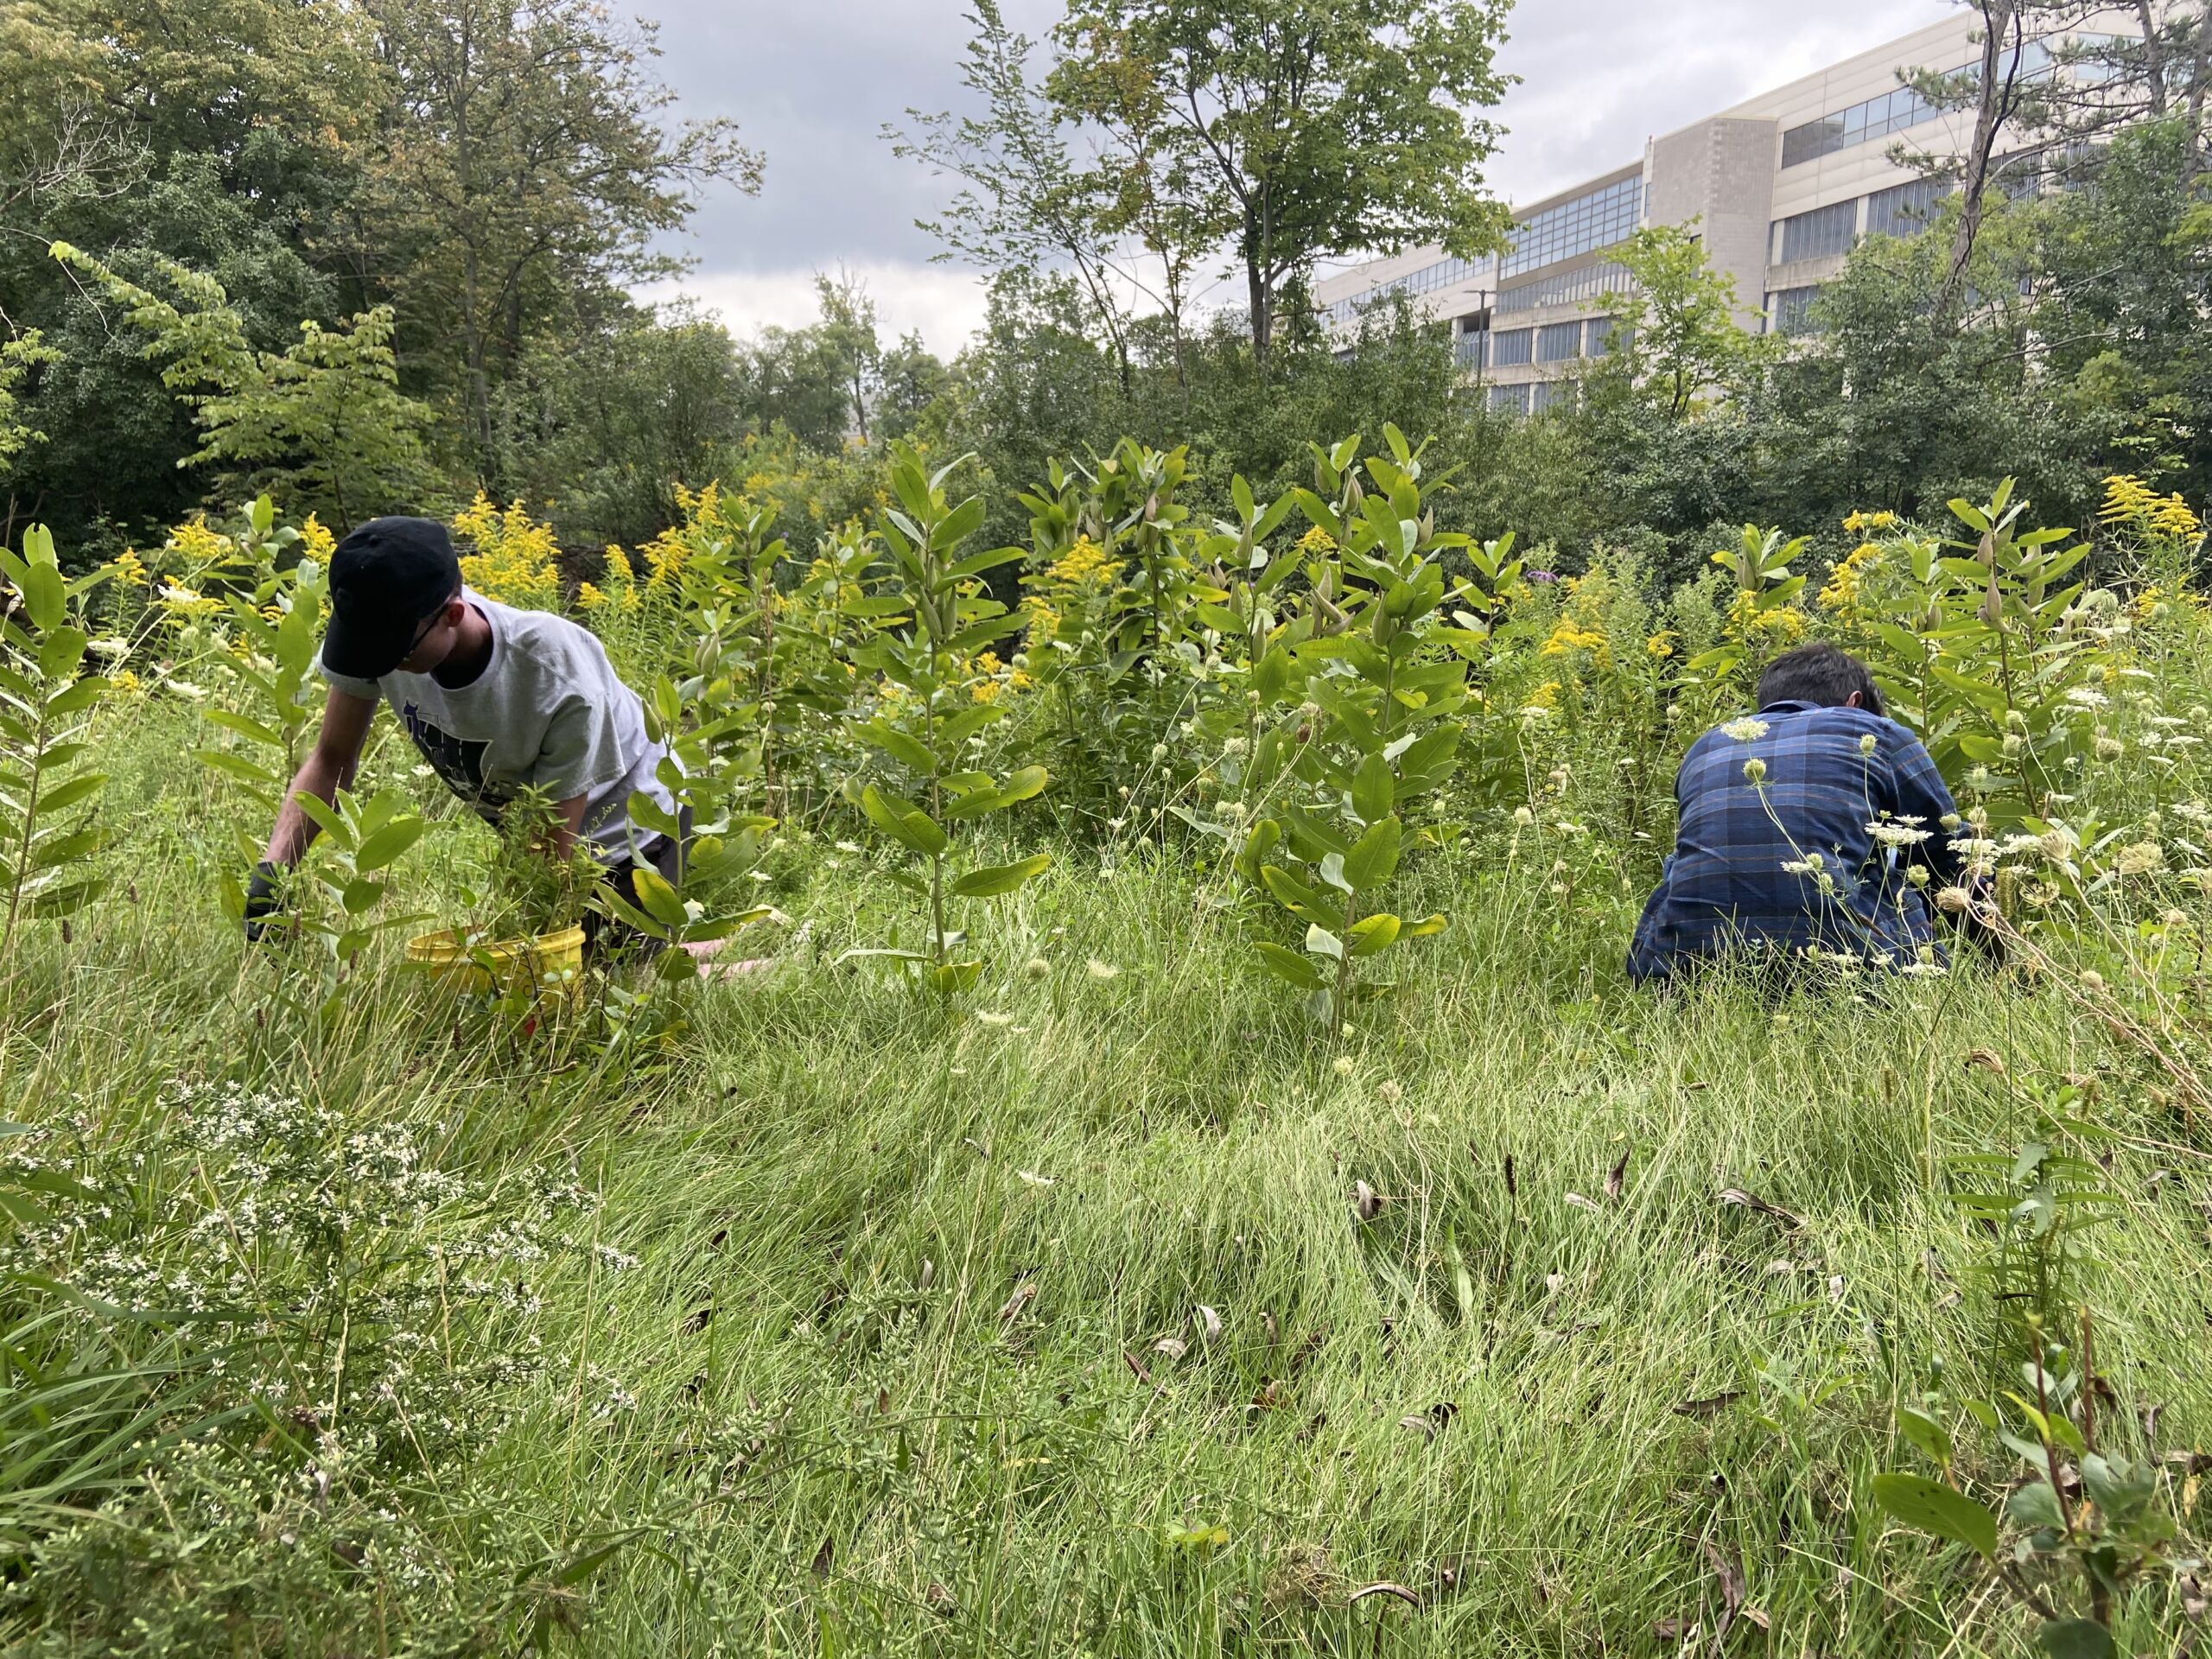 Two people kneel in a grassy area to plant plants.